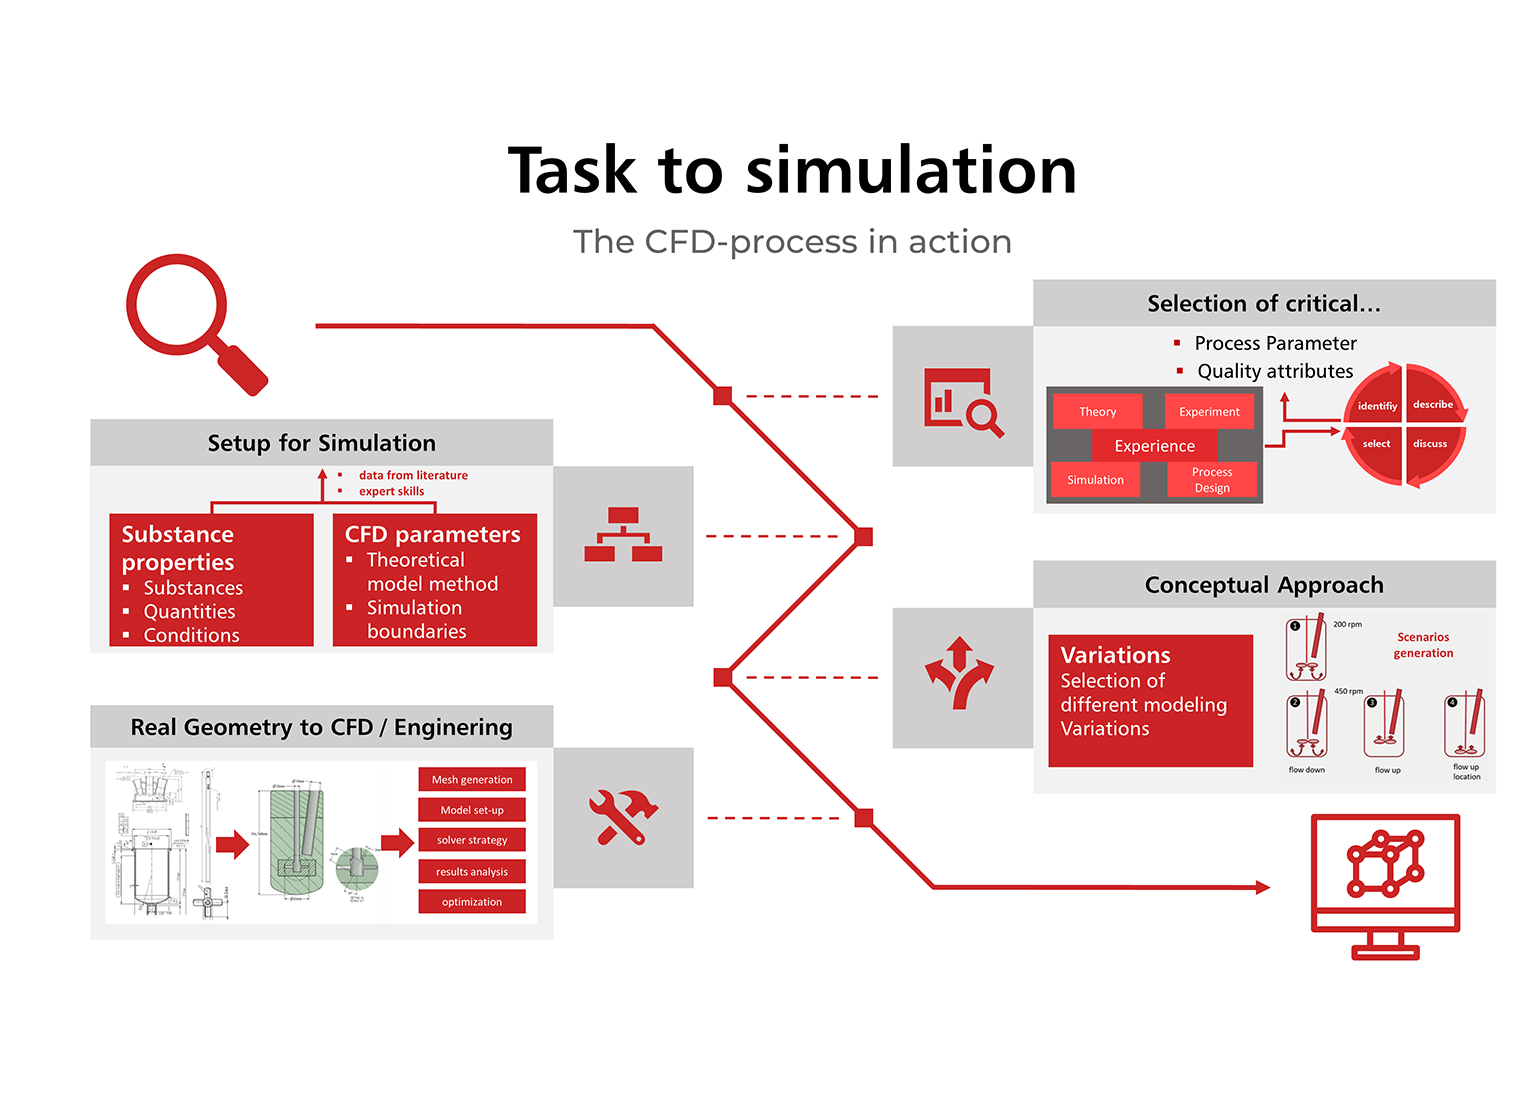 The path task to Simulation